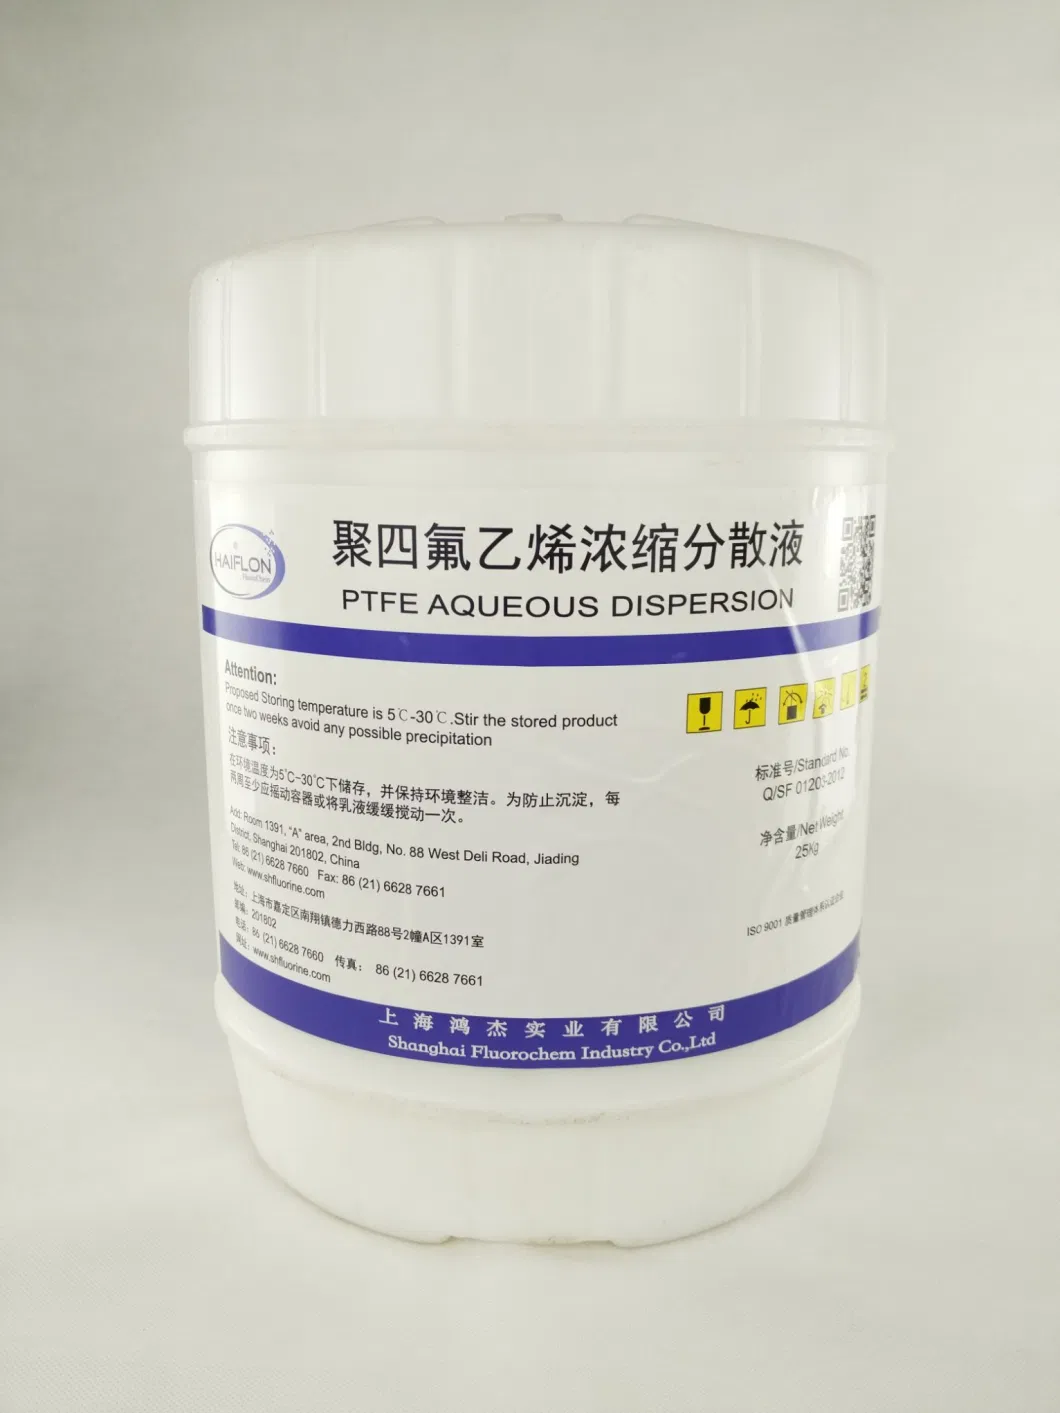 PTFE Aqueous Dispersion for Multilayer Impregnation of Glass Fiber, Woven Packing, Yarns and Other Fabric Materials